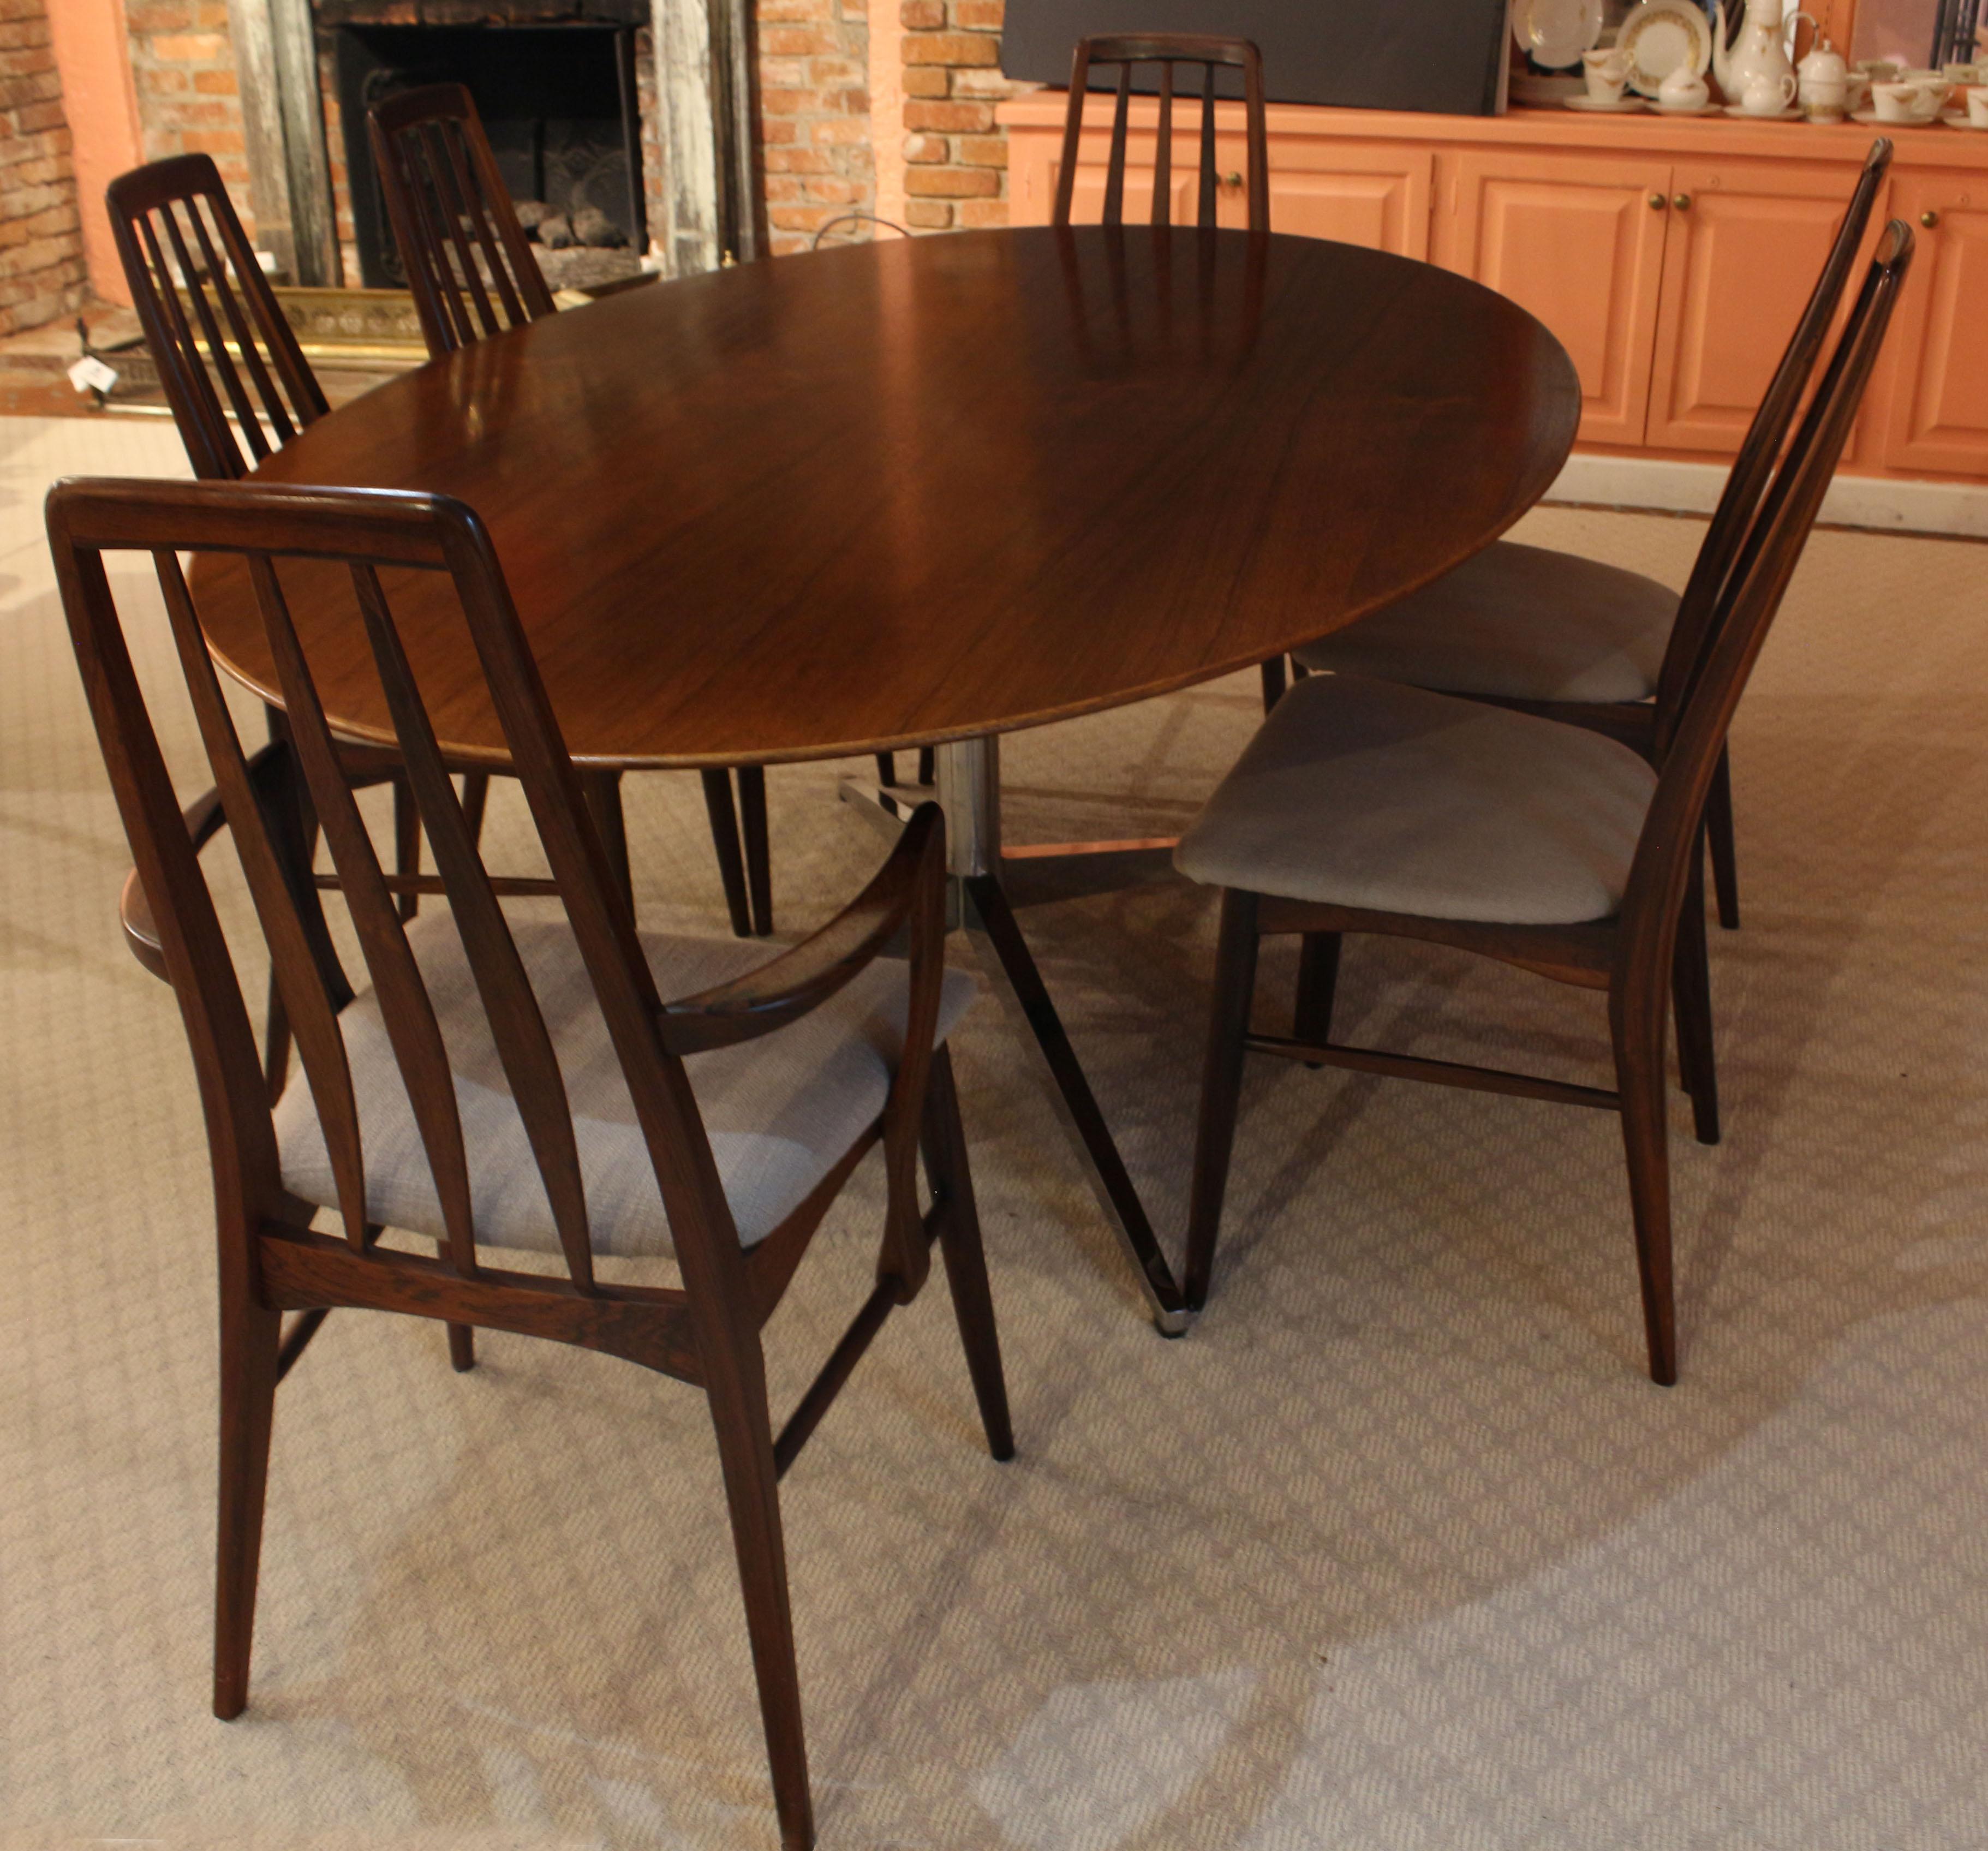 Mid-Century Modern 1960s Florence Knoll Oval Dining Table Made by Knoll For Sale